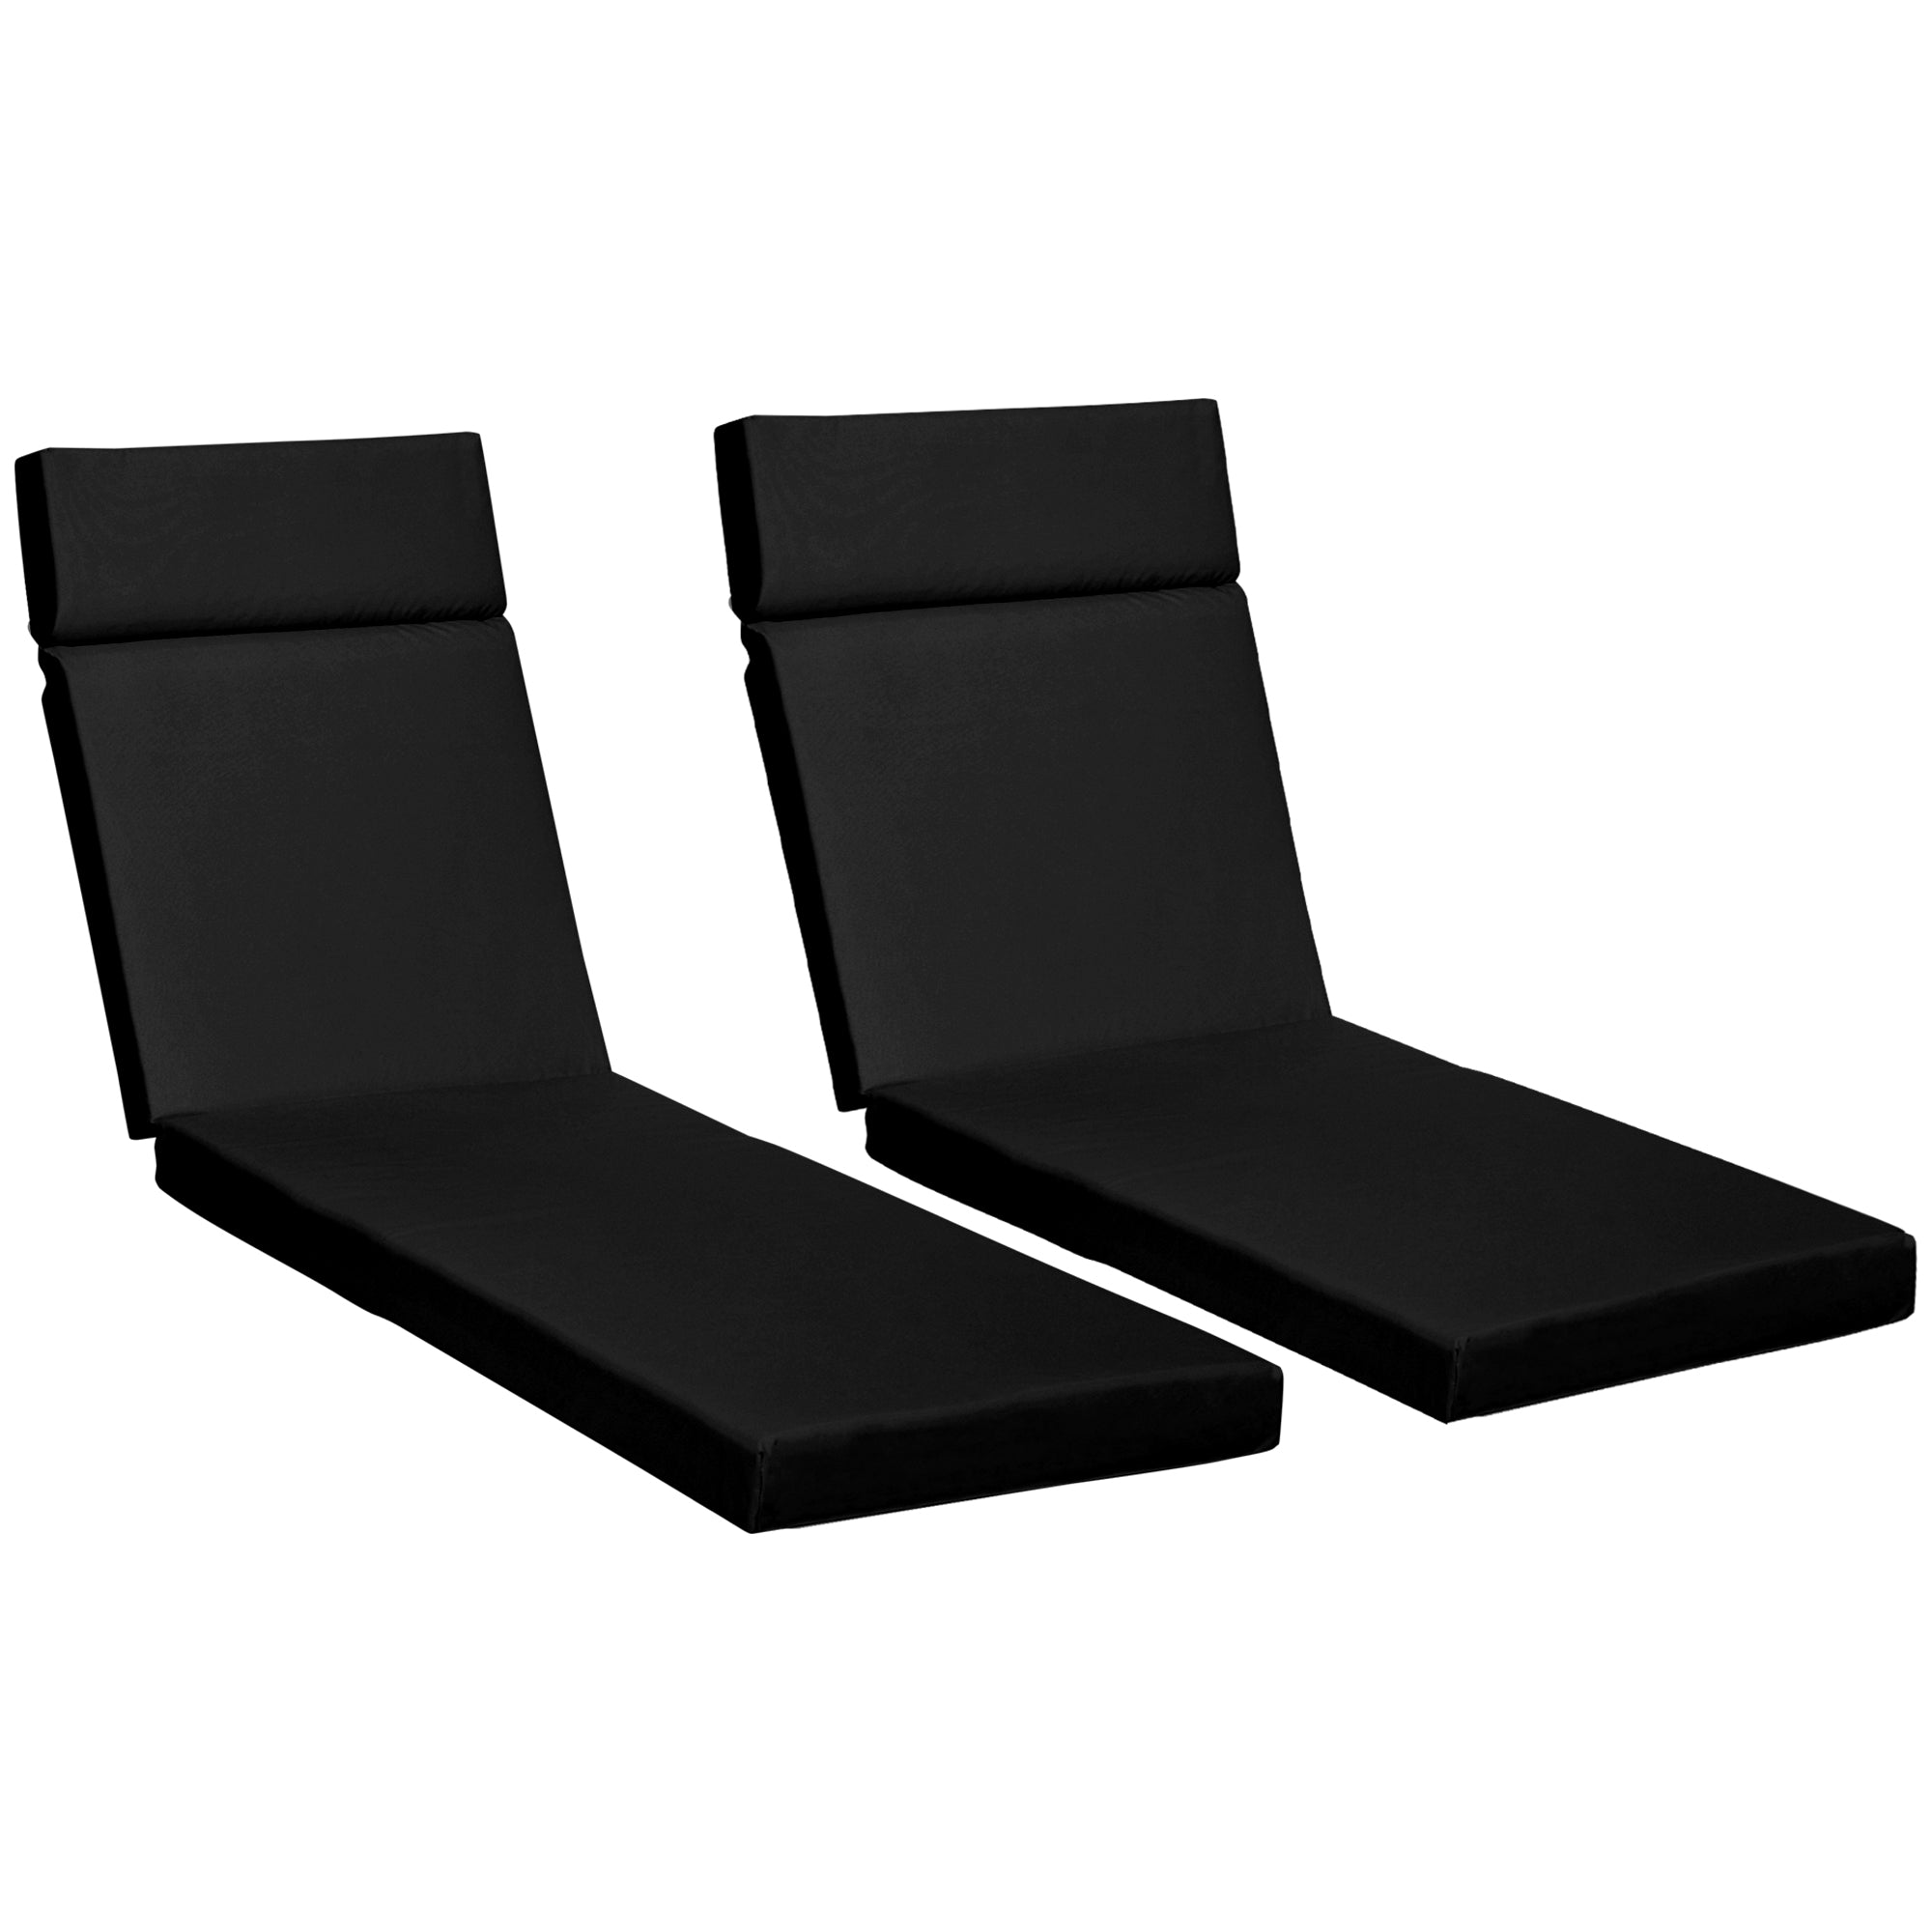 Outsunny Set of 2 Lounger Cushions Deep Seat Patio Cushions with Ties Black  | TJ Hughes